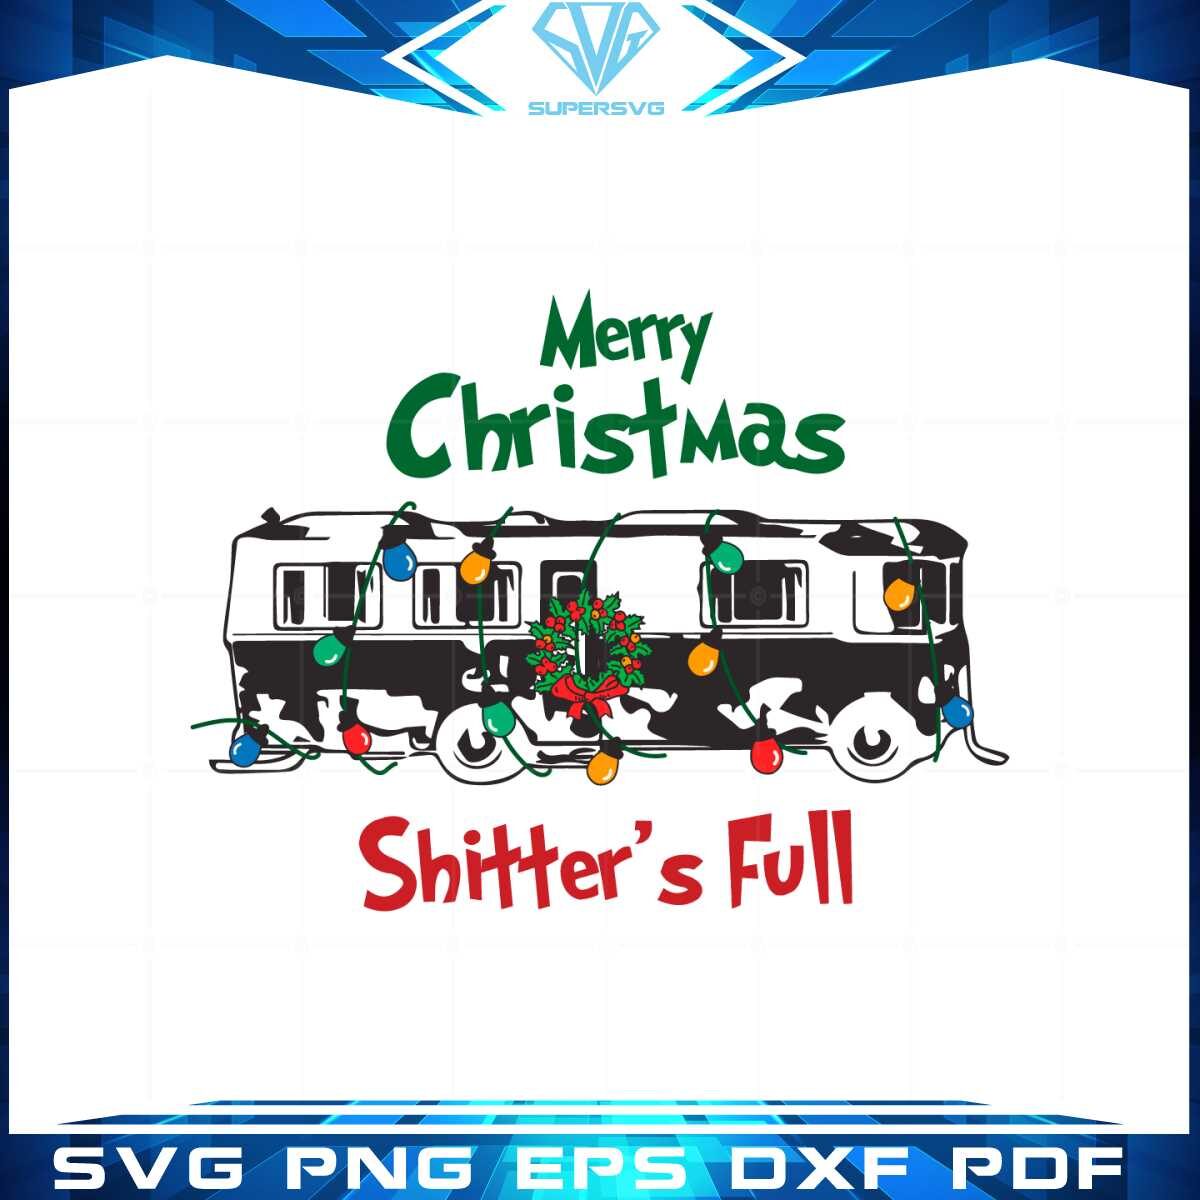 merry-christmas-shitters-full-svg-graphic-designs-files